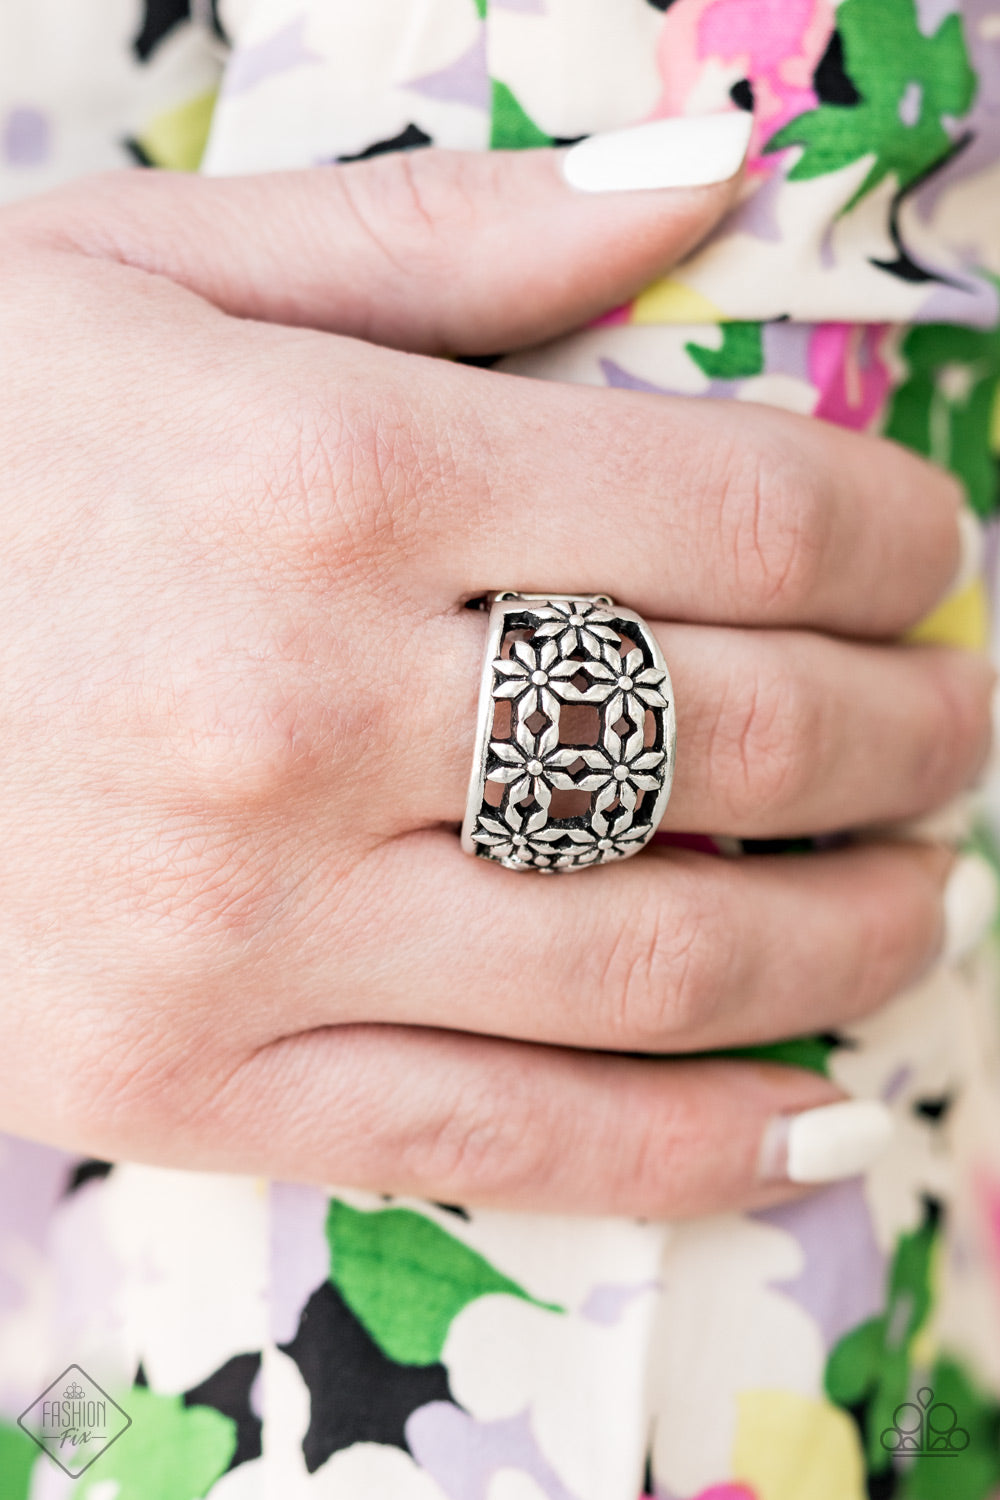 Paparazzi Ring ~ Crazy About Daisies - Silver - Fashion Fix Aug2020